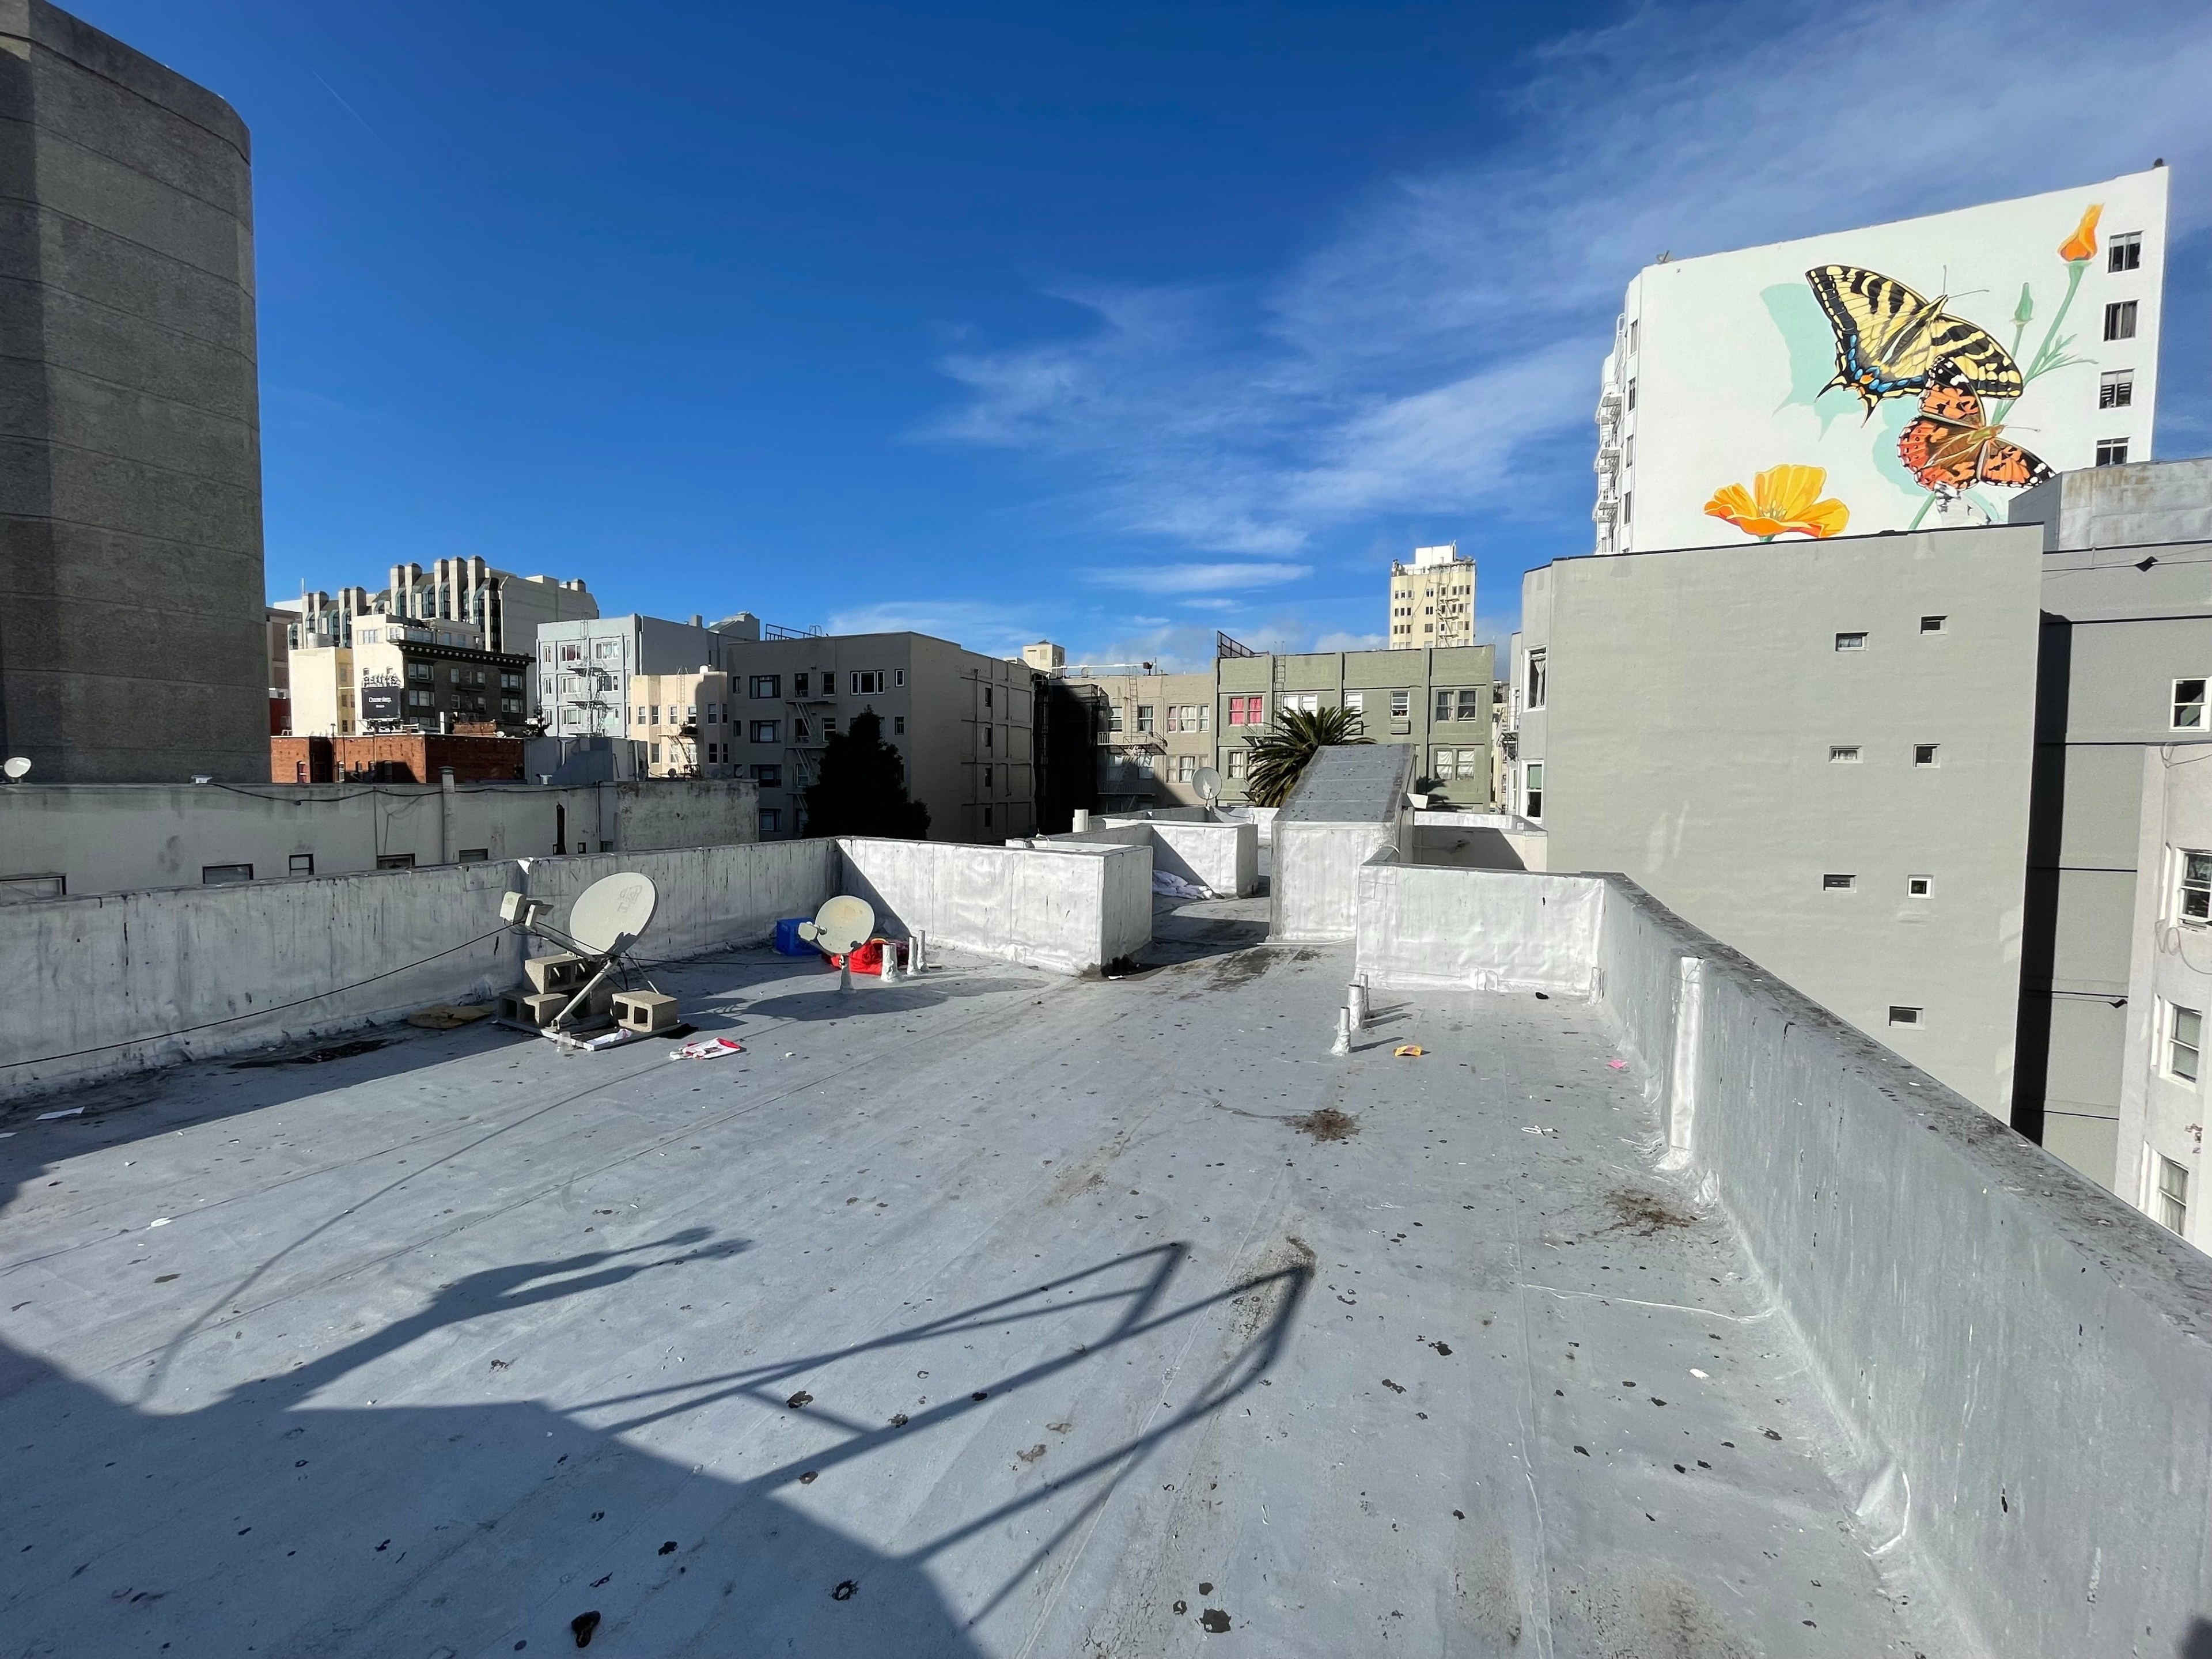 The rooftop of an apartment building is seen during the daytime.